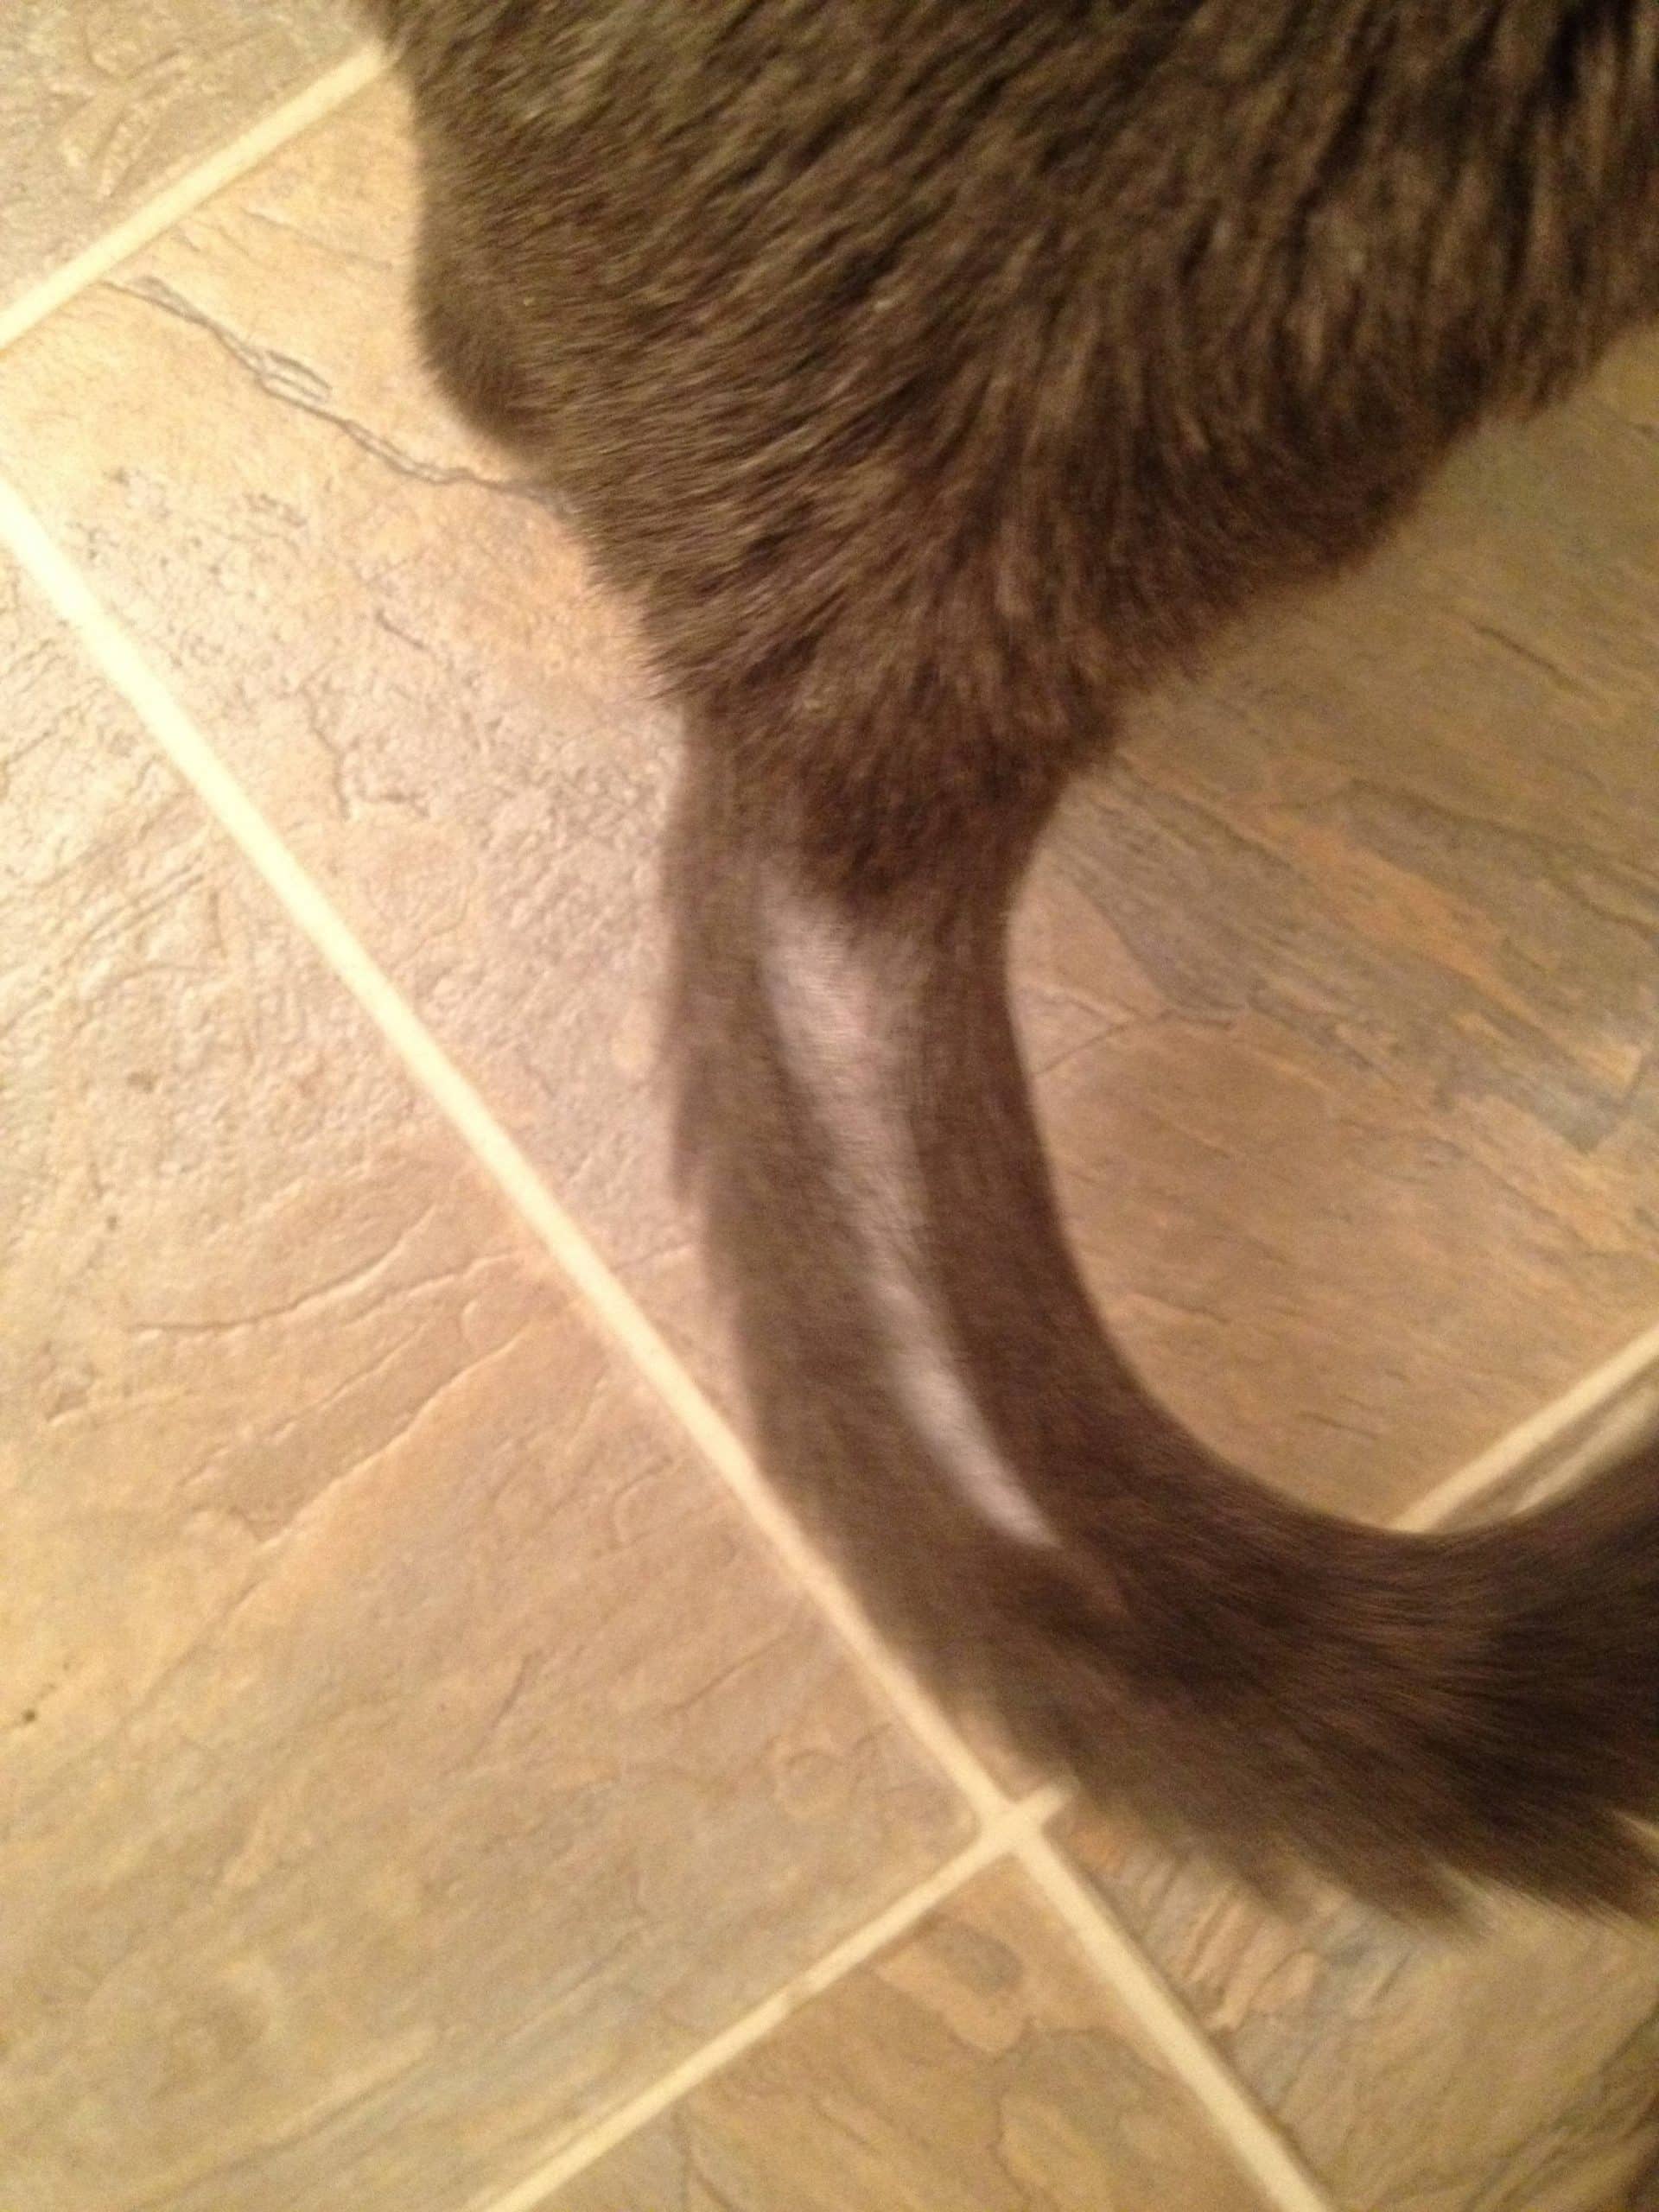 Why Does My Cat Pull His Hair Out In Clumps